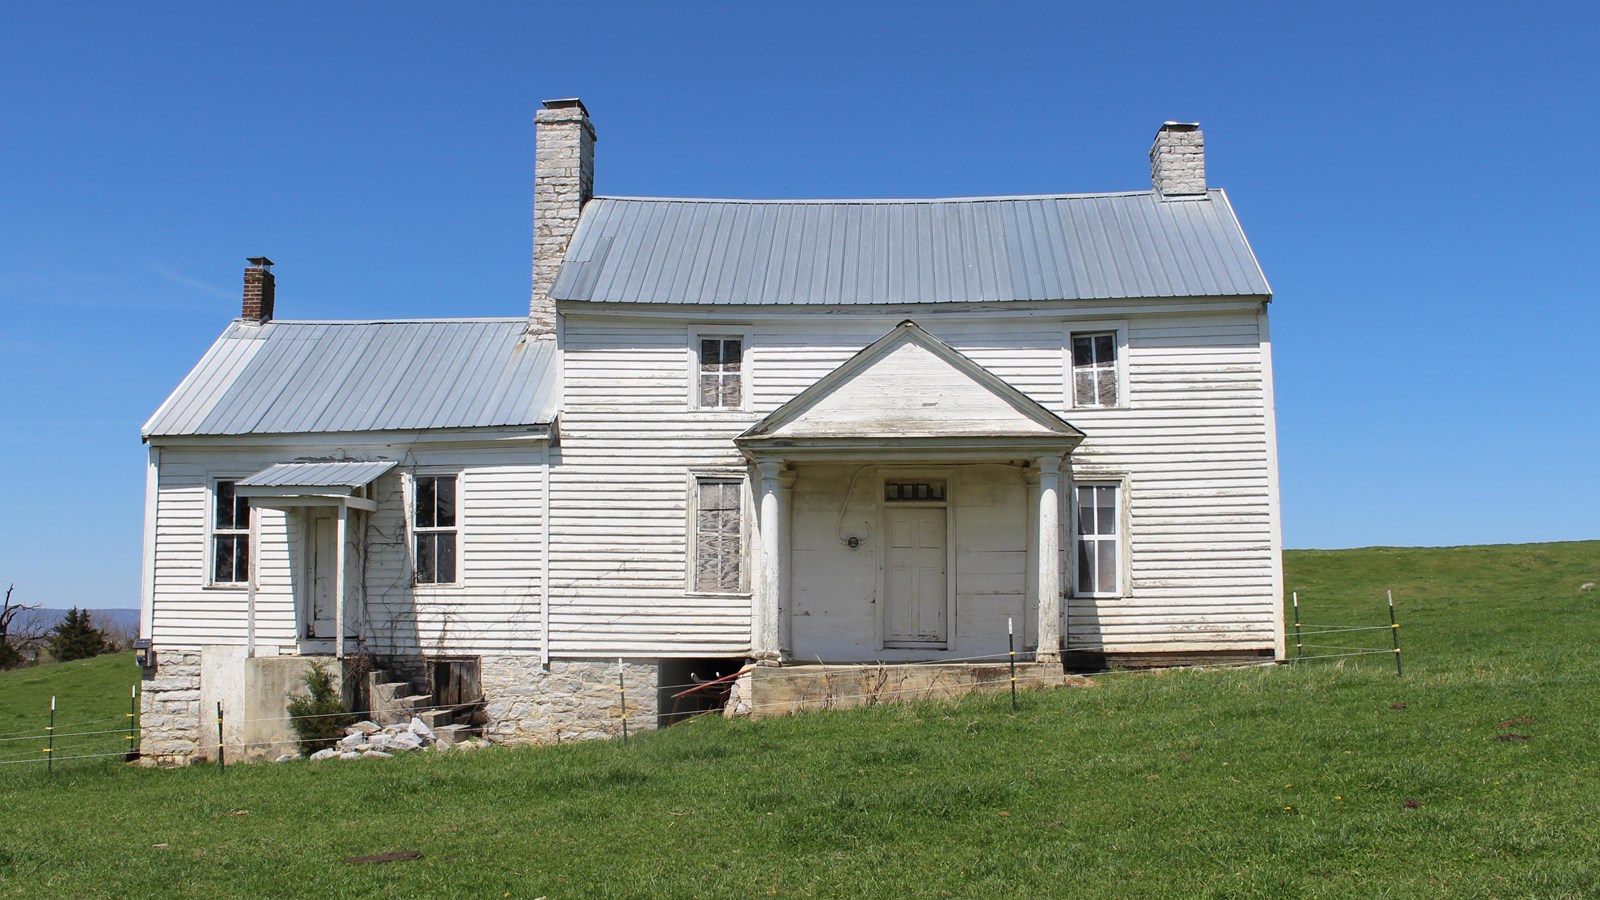 An 1800s farmhouse in a pasture has white clapboard siding and a grey roof.